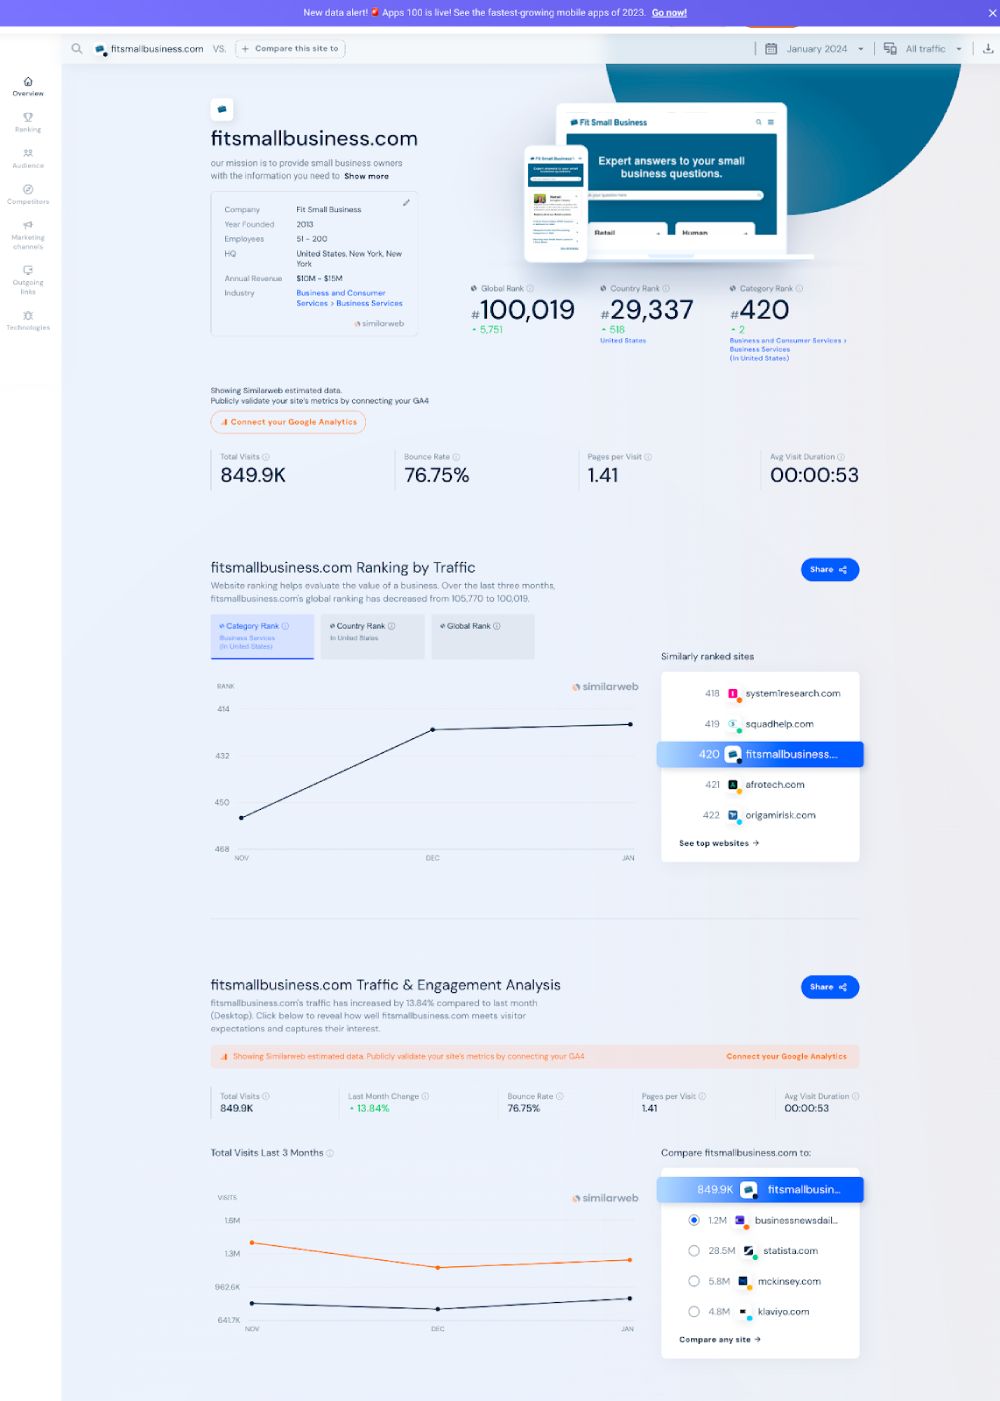 An example of a website analysis by SimilarWeb.